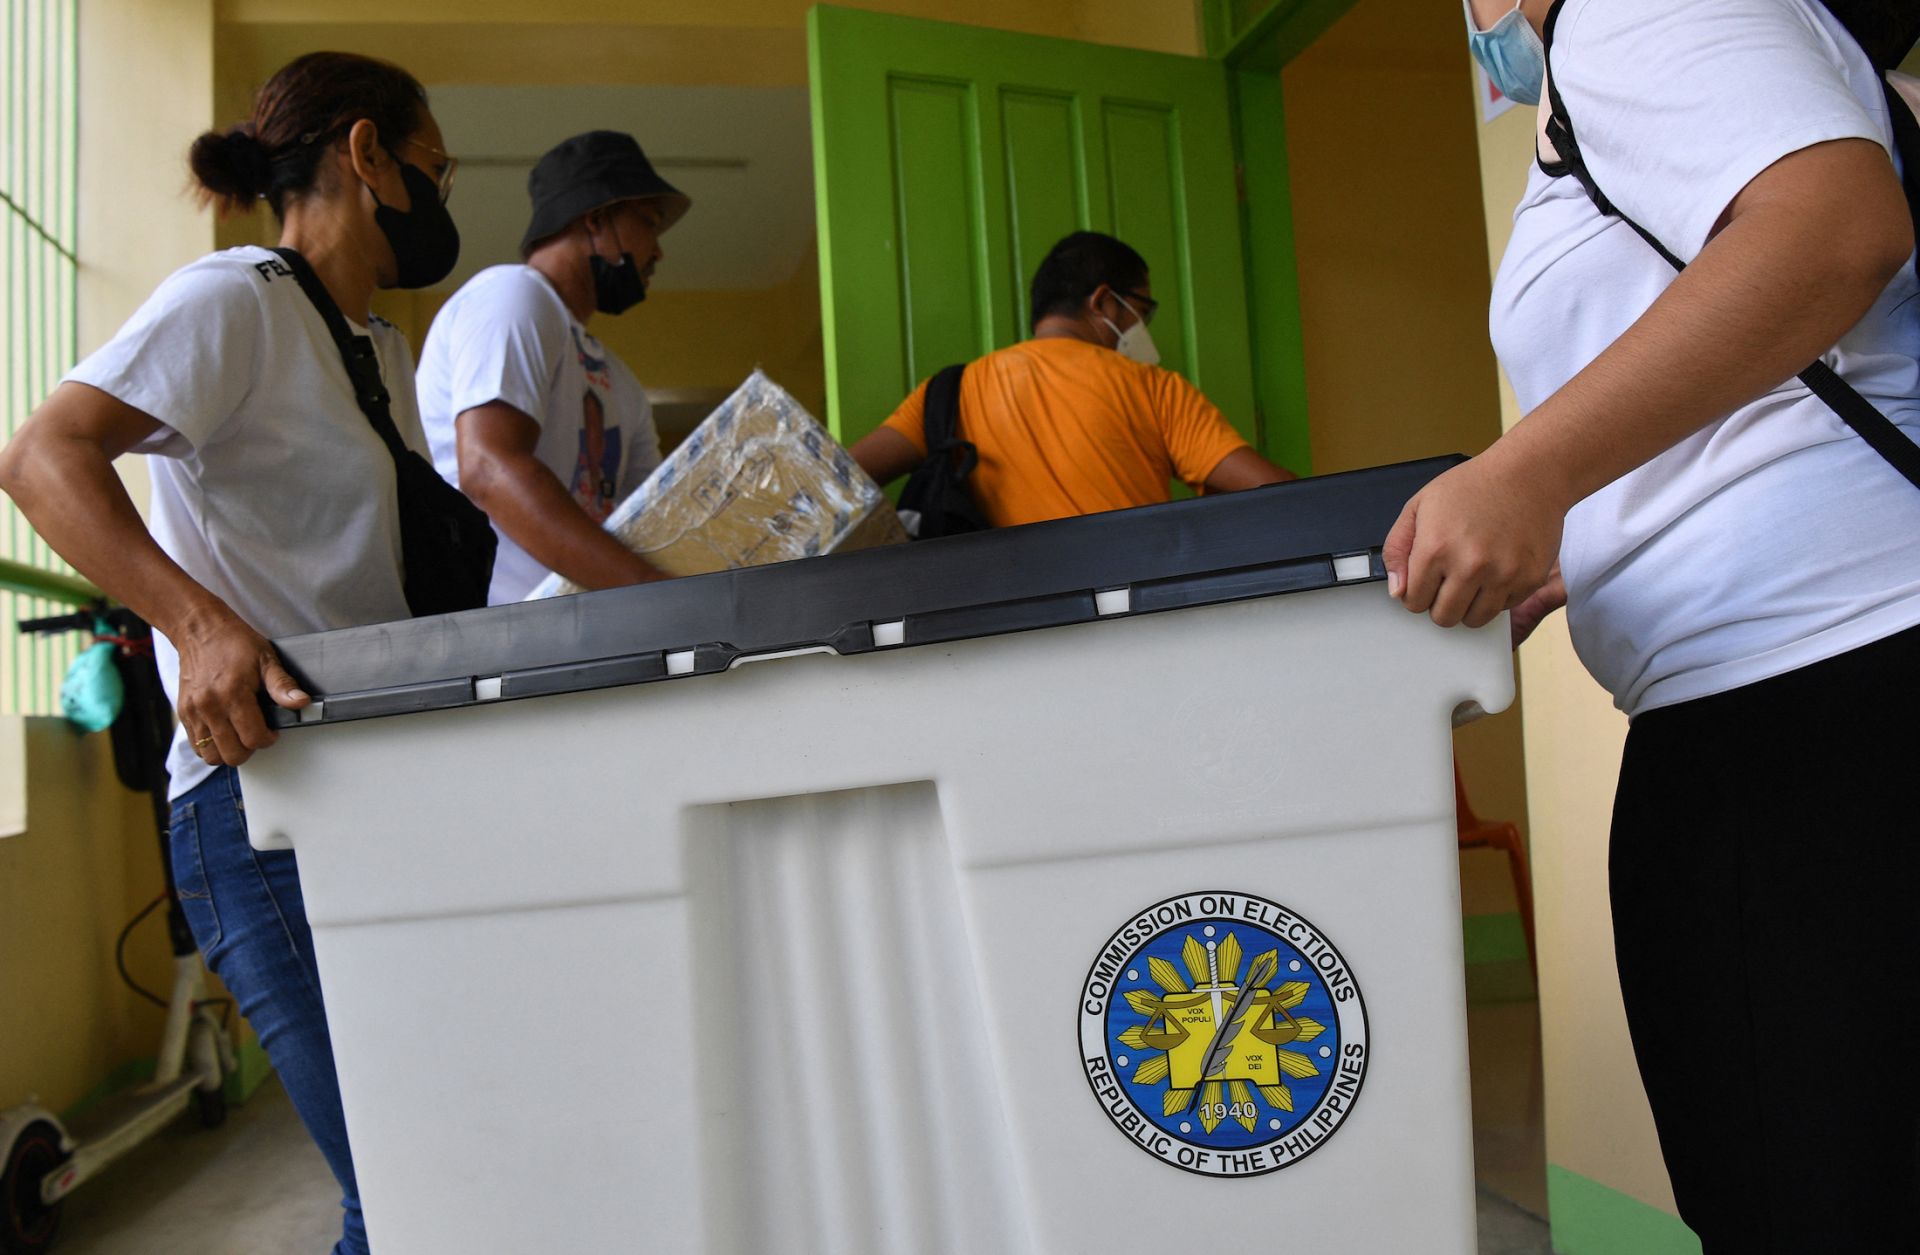 Poll workers carry a ballot box on May 4, 2022, at a polling station during preparations ahead of the May 9 presidential election in Manila, Philippines.A look at what the coming week will bring -- and a list of recommended RANE articles from the week that was.